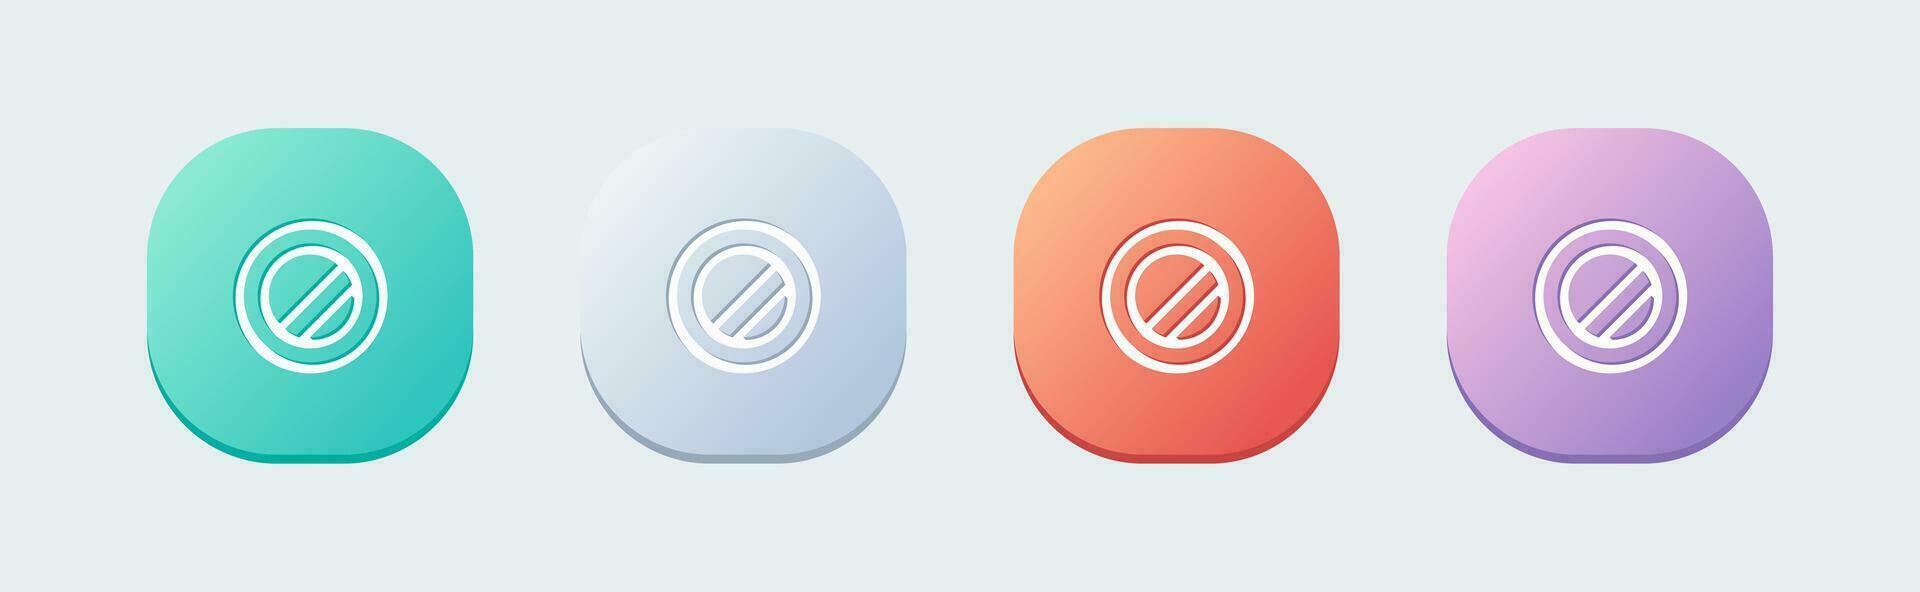 Contrast line icon in flat design style. Brightness signs vector illustration.